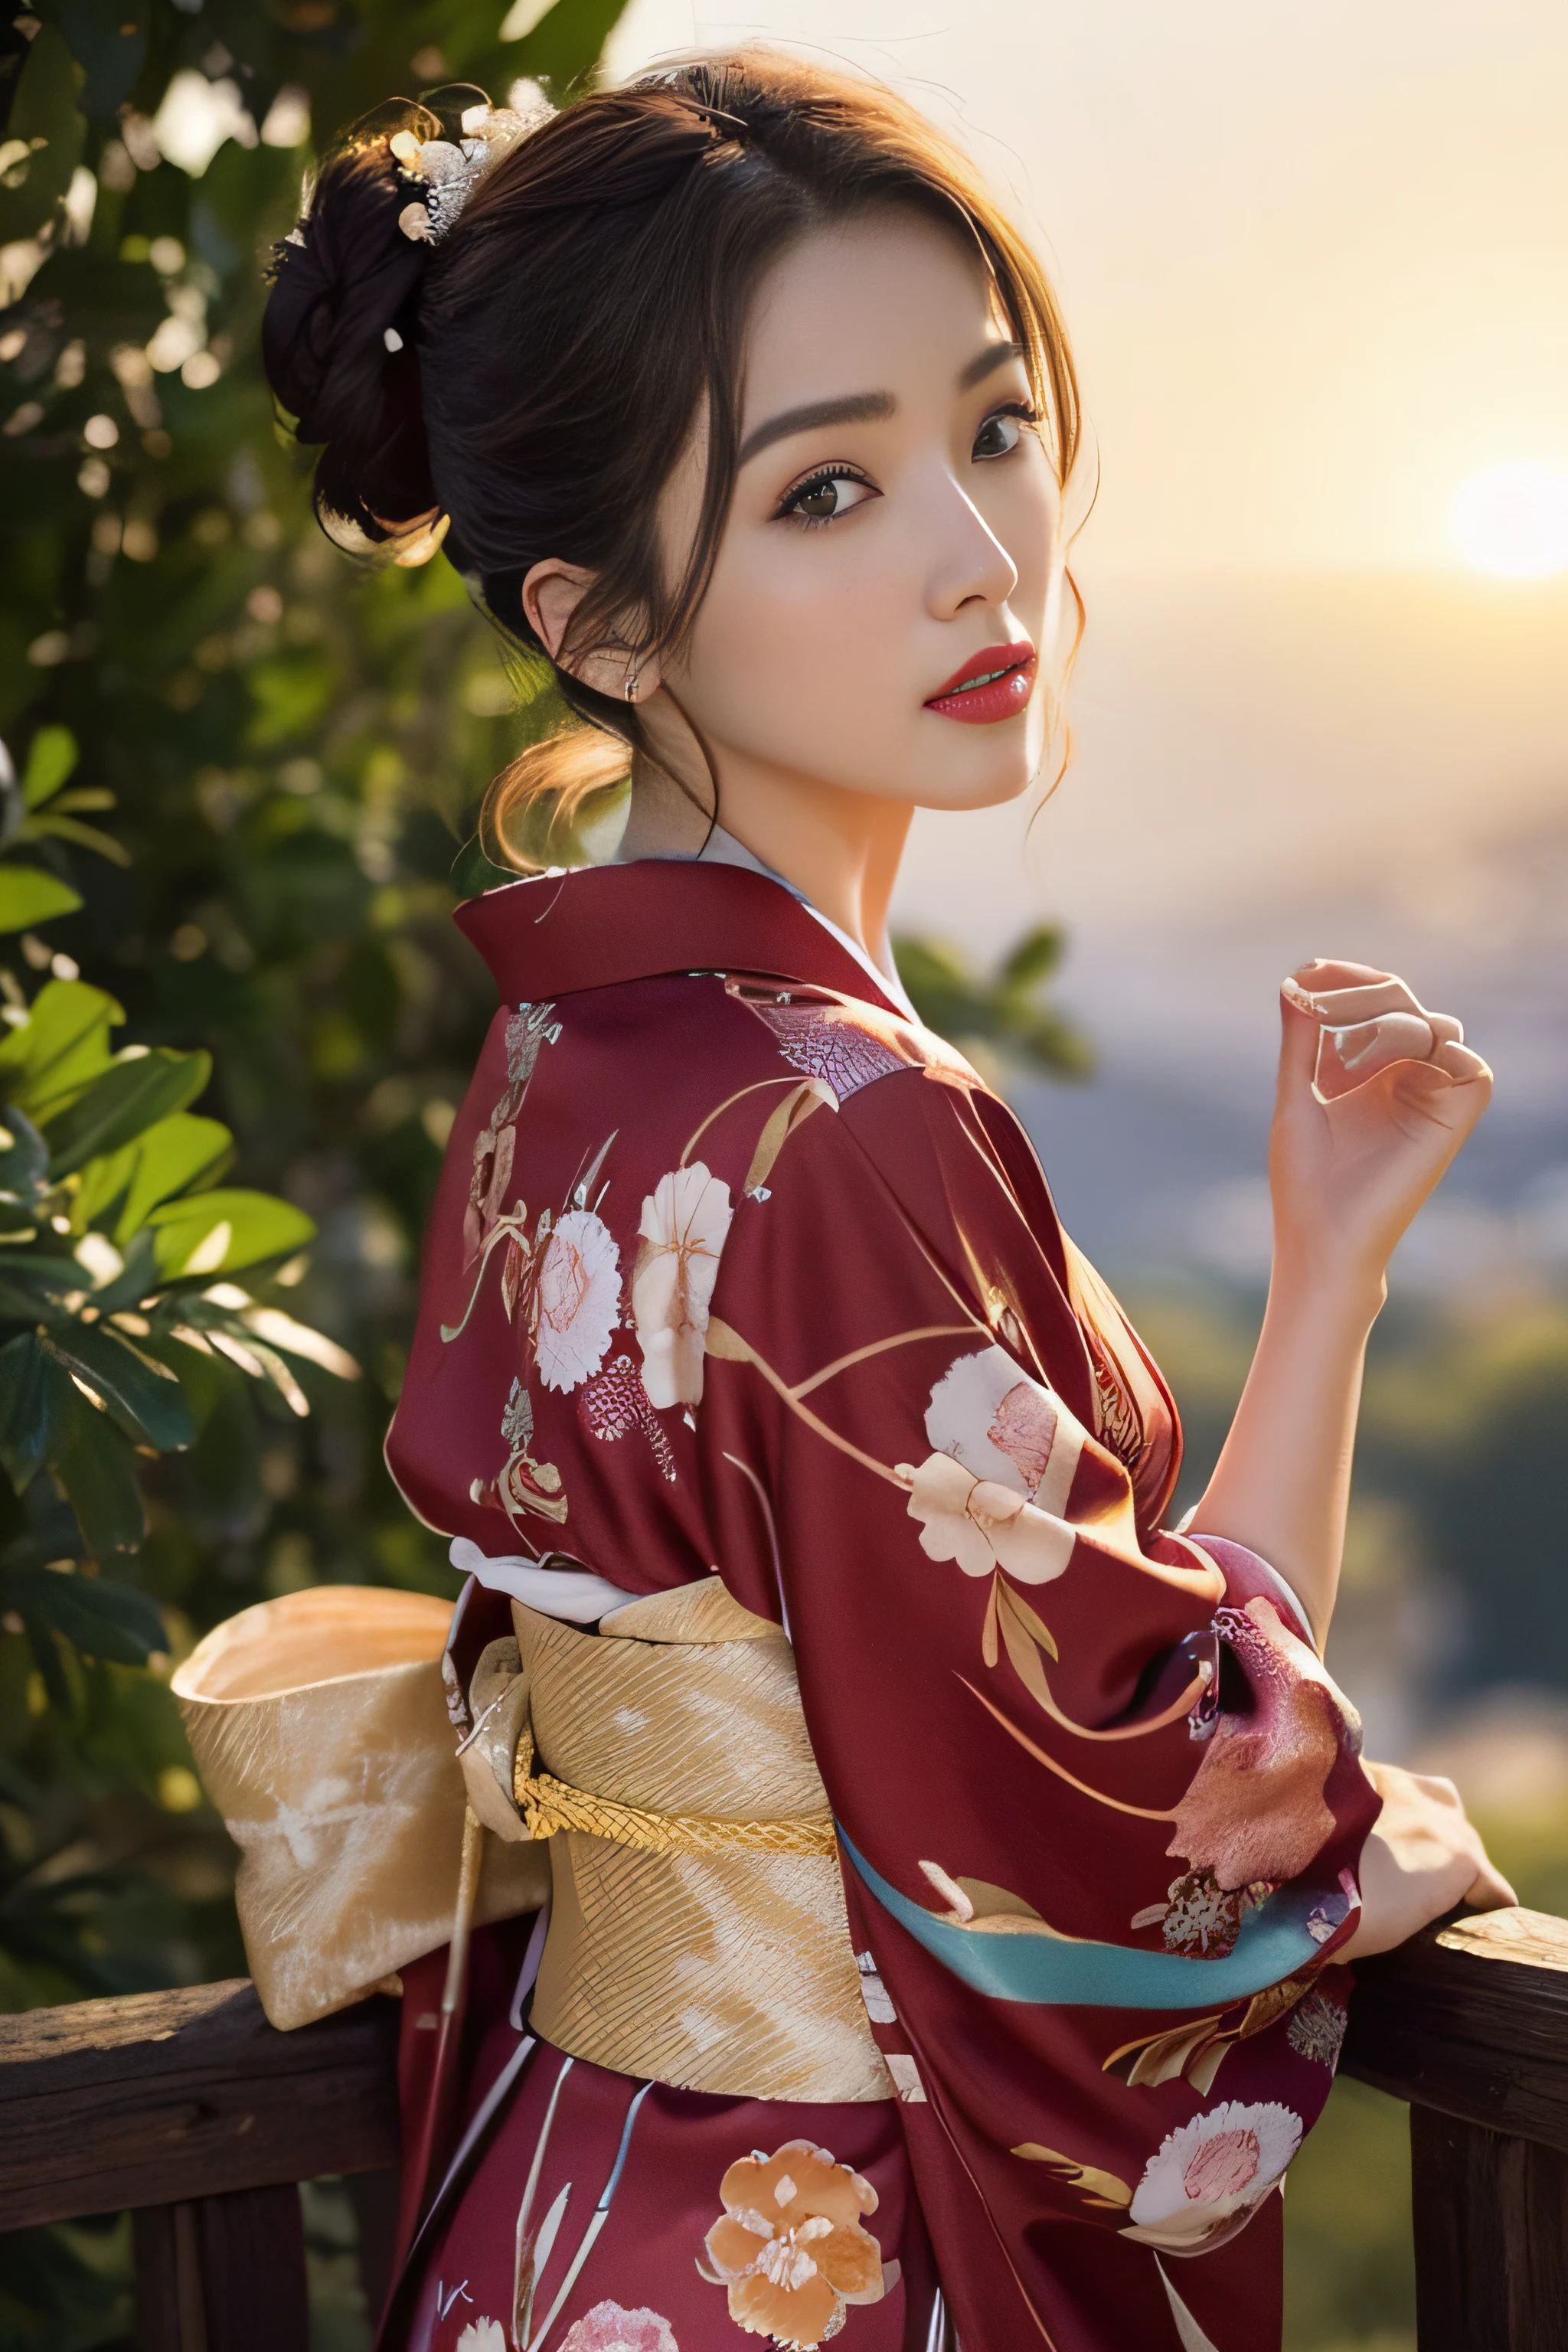 1womanl、(Super beautiful)、(beauitful face:1.5)、(A detailed face)、Early 30s、(Kimono)、Wearing heavy makeup、(red-lips)、Brown hair、(Immediately after sunset:1.2)、(Back lighting)、A scent that can't be hidden、Before you know it, It's ingrained in you、If someone takes you, I want to kill you、Sleep in a hideout、Winding Slope、Joren Falls、soar、shake off、Passing through the dazzling flameont. Amagi I want to climb with you、At SFW